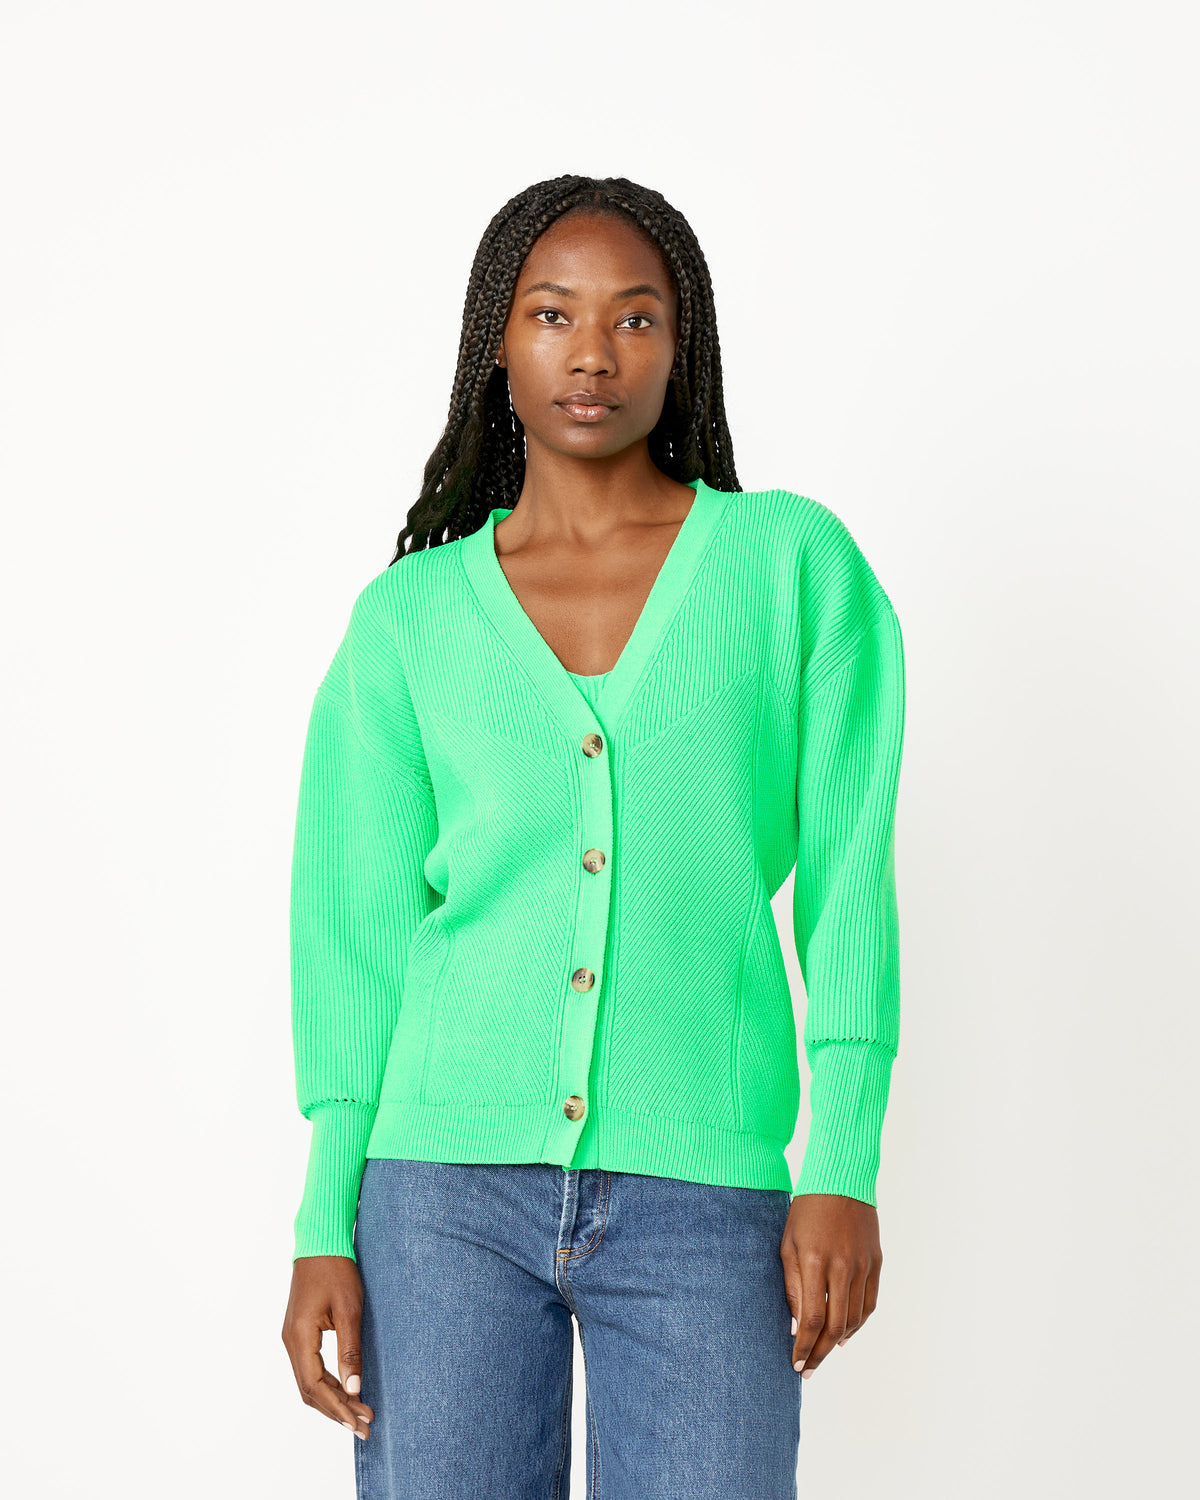 Explore our Hebe Cardigan in Green Rachel Comey s to Find Your